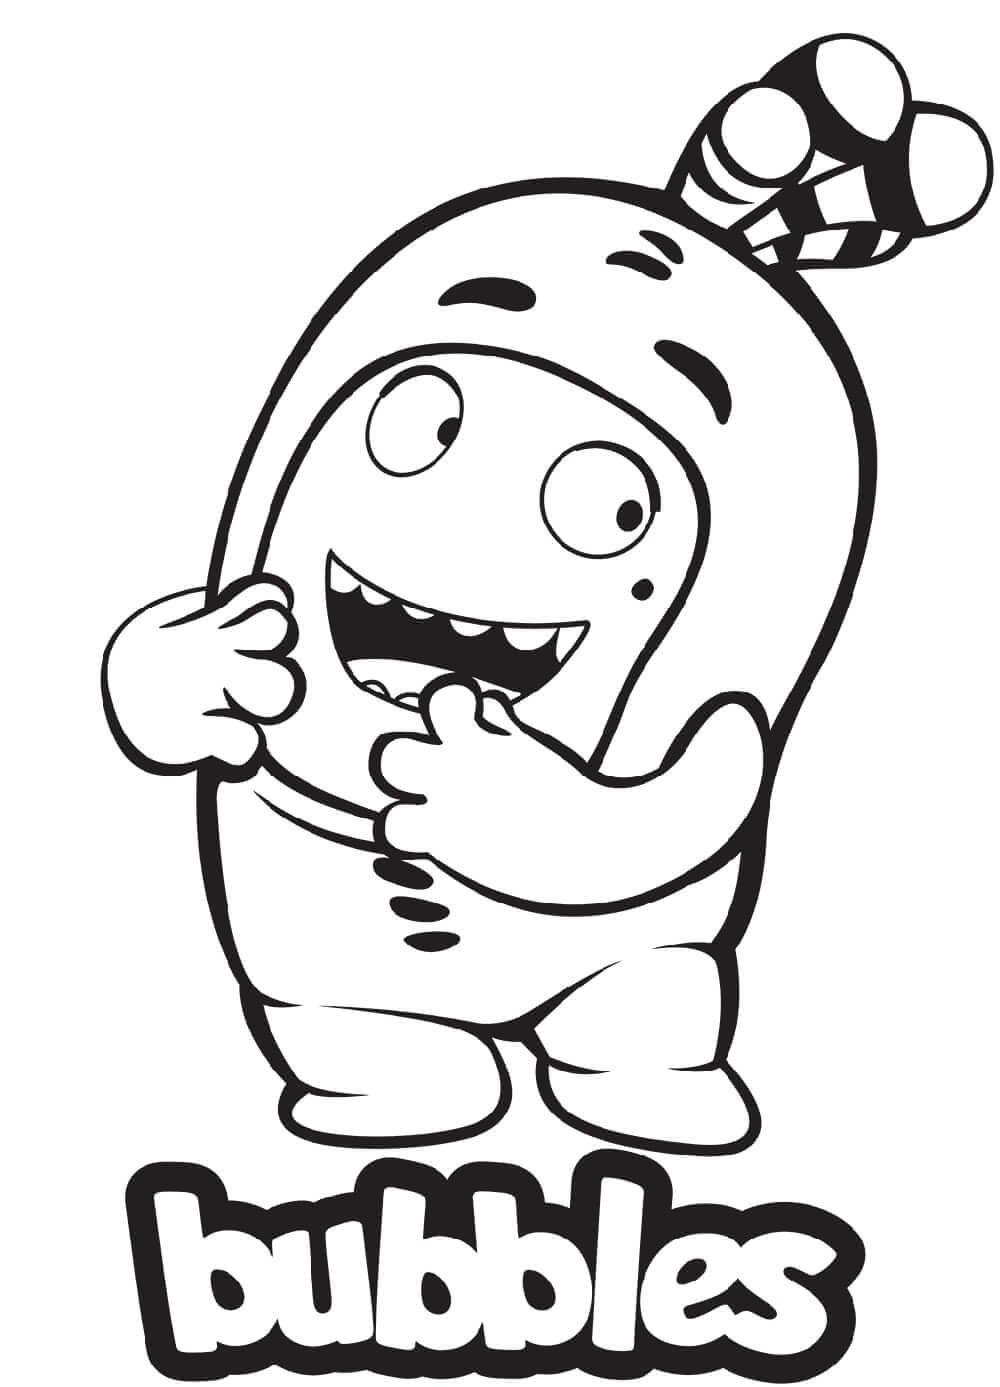 Bubbles Oddbods Coloring Page Free Printable Coloring Pages For Kids